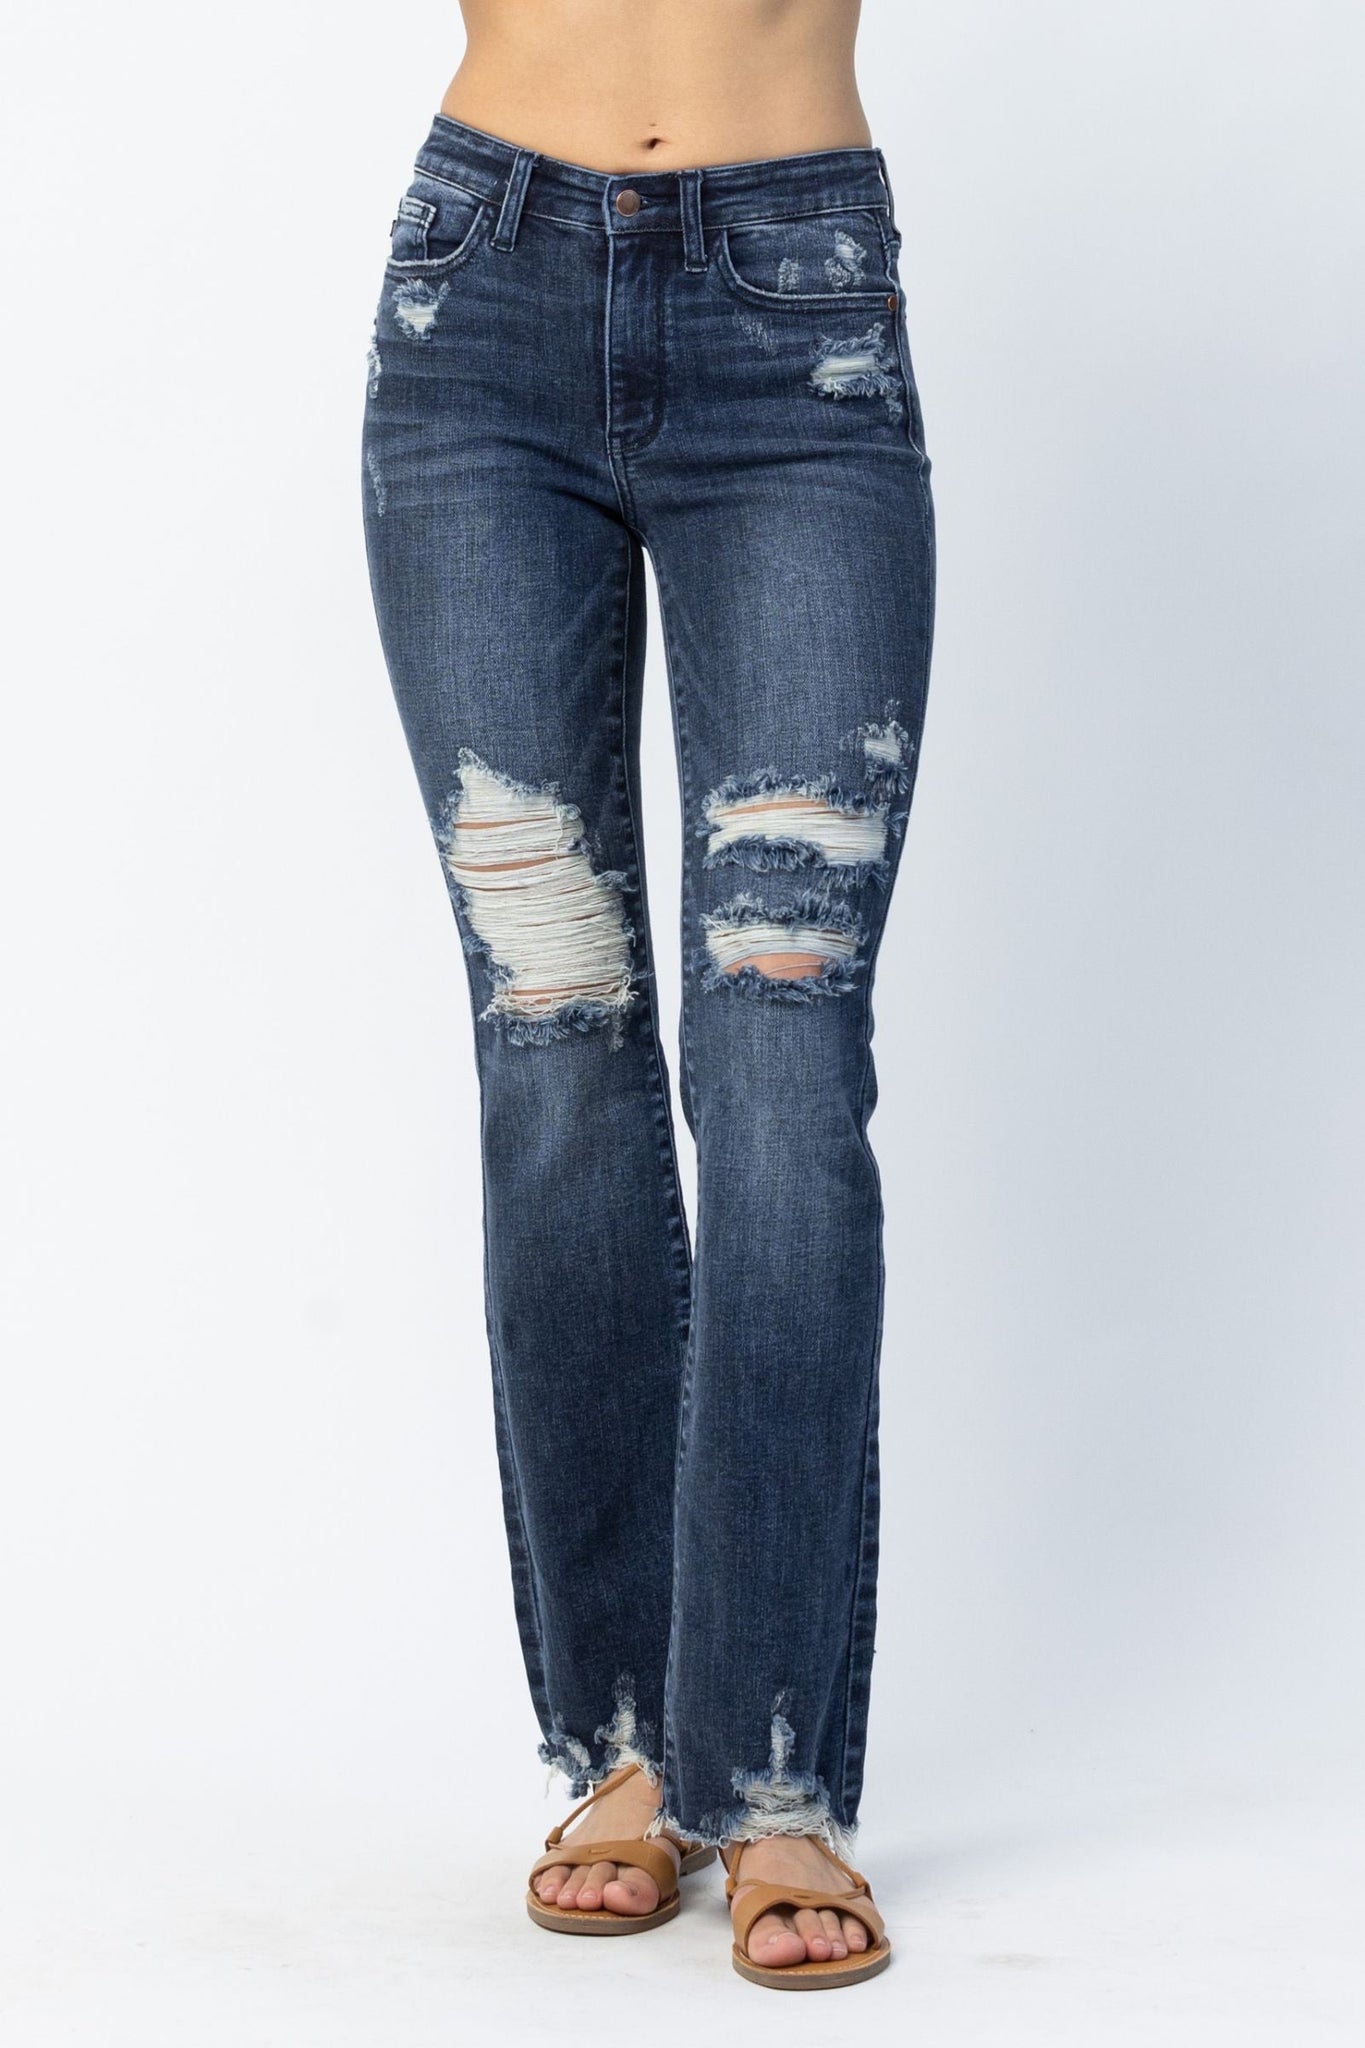 Judy Blue Mid Rise High Contrast Slim Bootcut Destroyed Jeans 82426 - Exclusive-Jeans-Sunshine and Wine Boutique